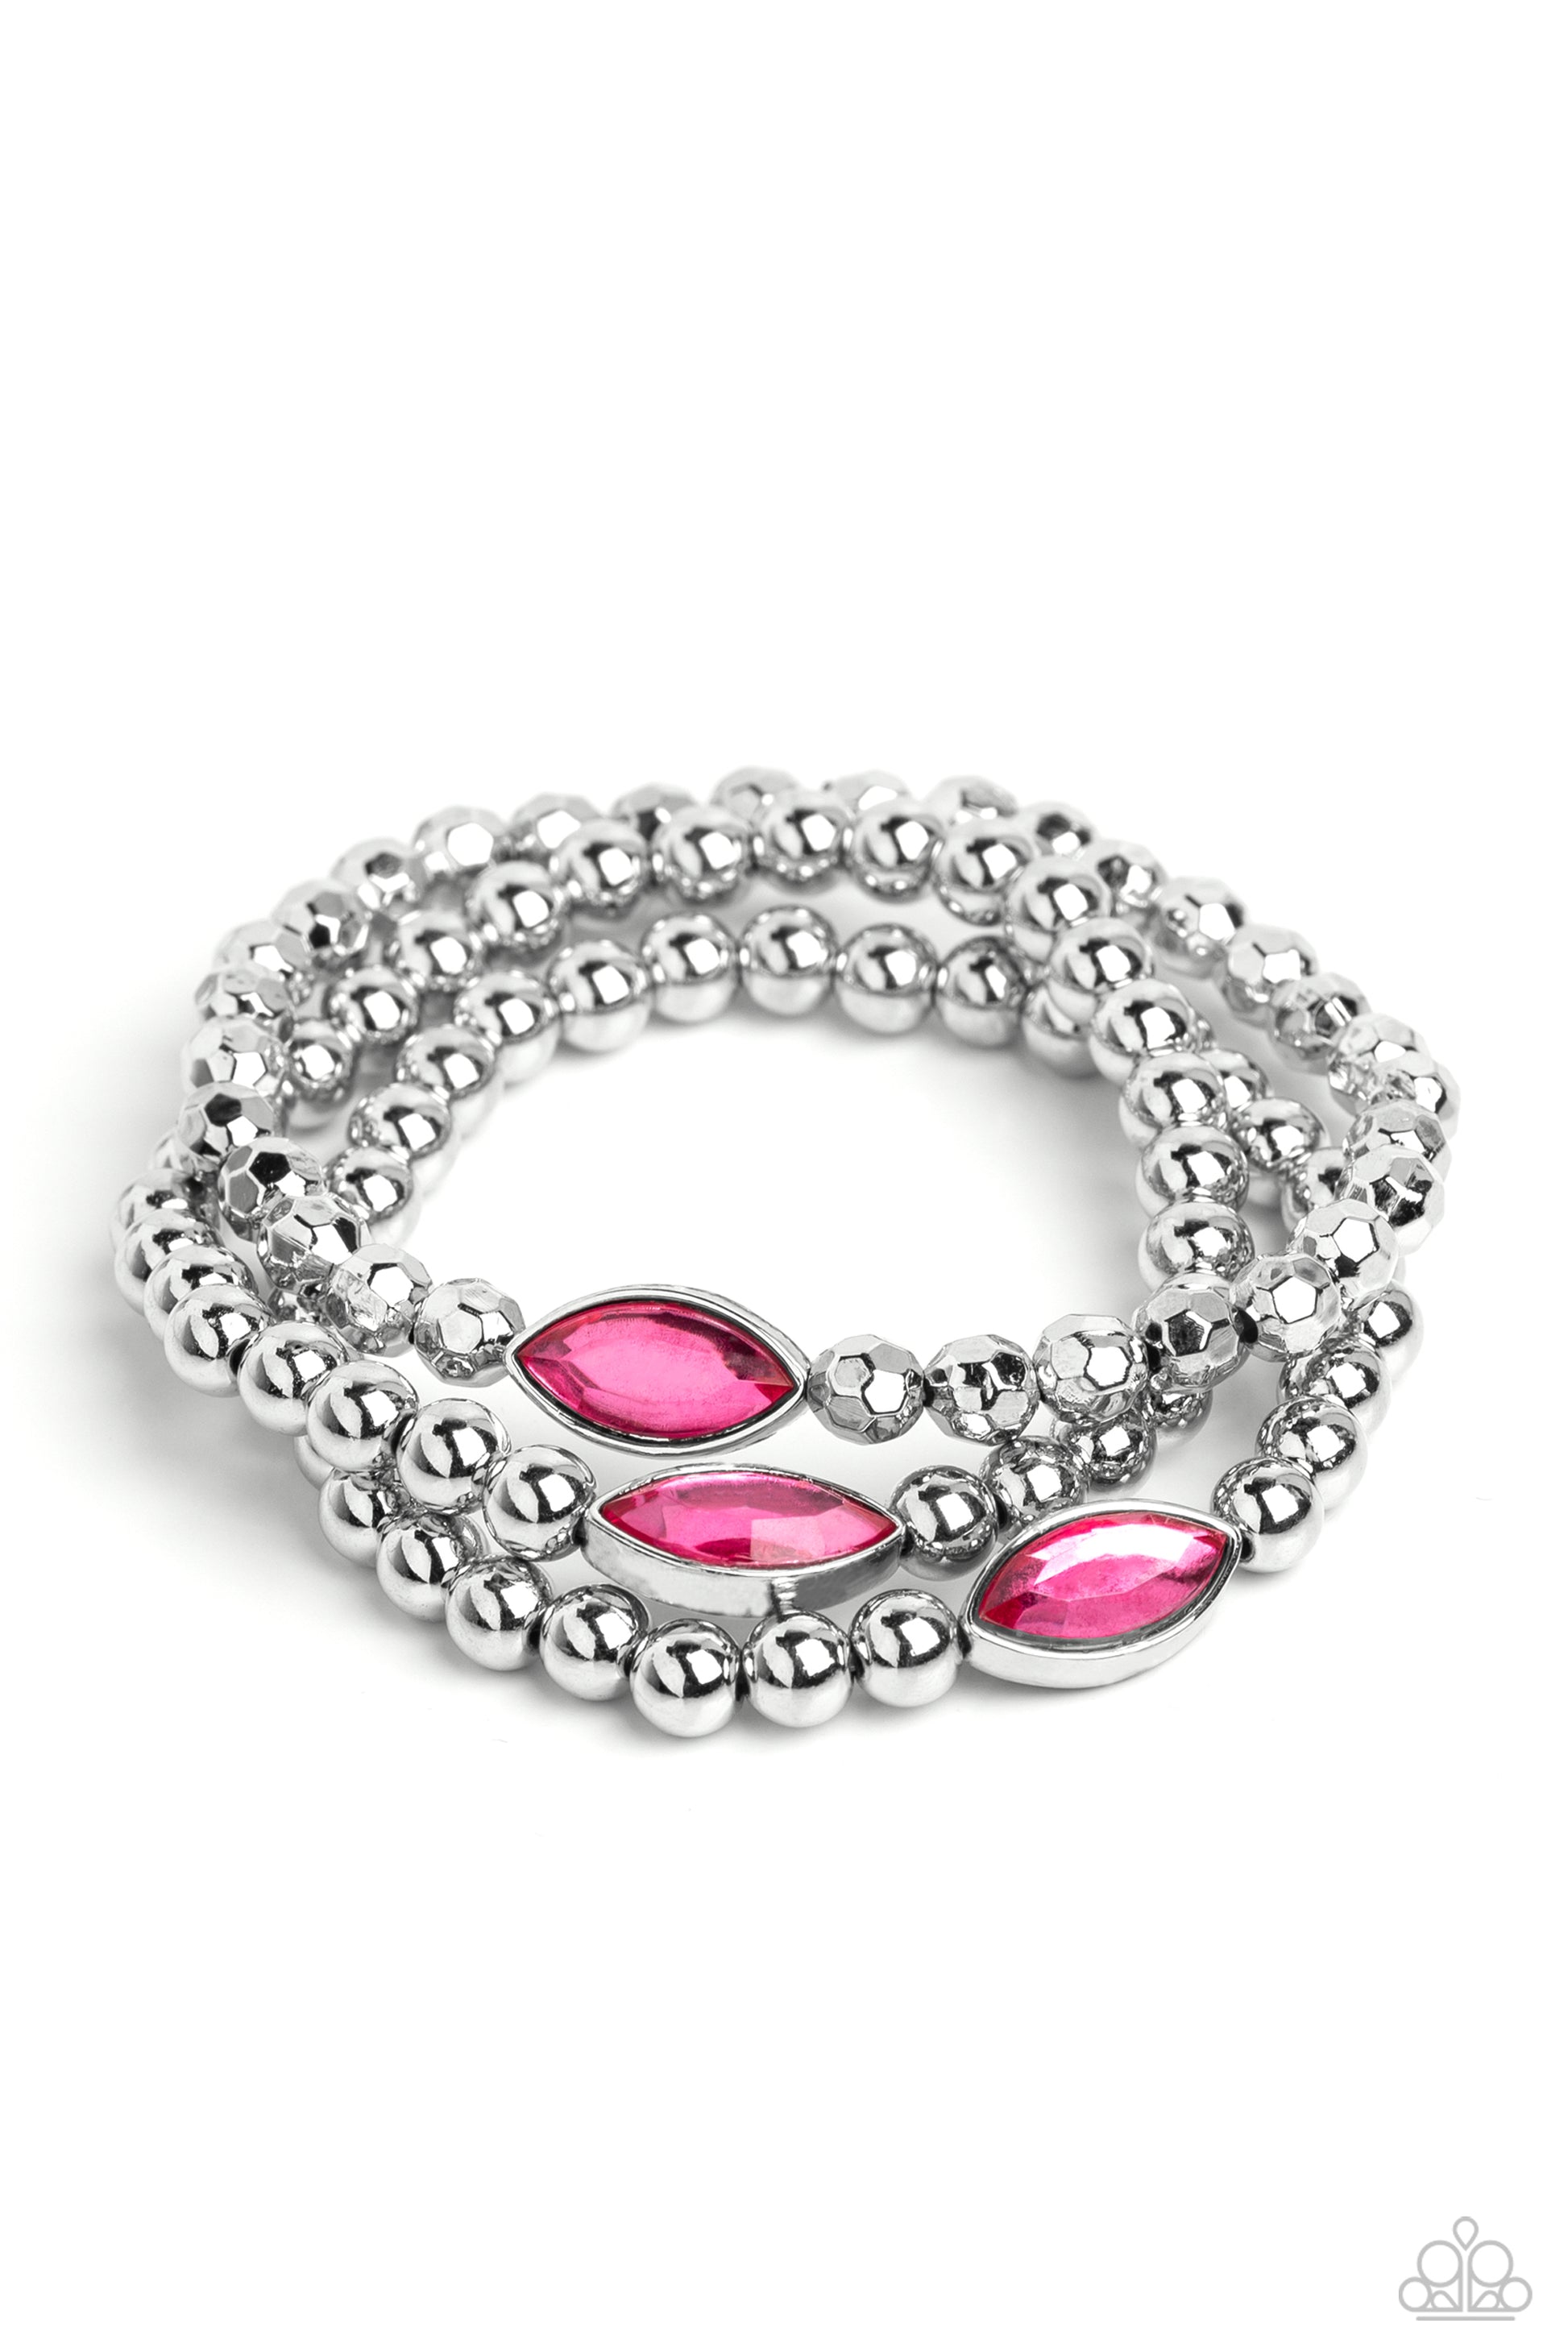 Paparazzi Accessories - Twinkling Team - Pink Bracelets featured in the center of a faceted and smooth silver beaded display, a dazzling Pink Peacock, marquise-cut gem pressed in a sleek silver frame wraps around the wrist on elastic stretchy bands for a classy statement.  Sold as one set of three bracelets.